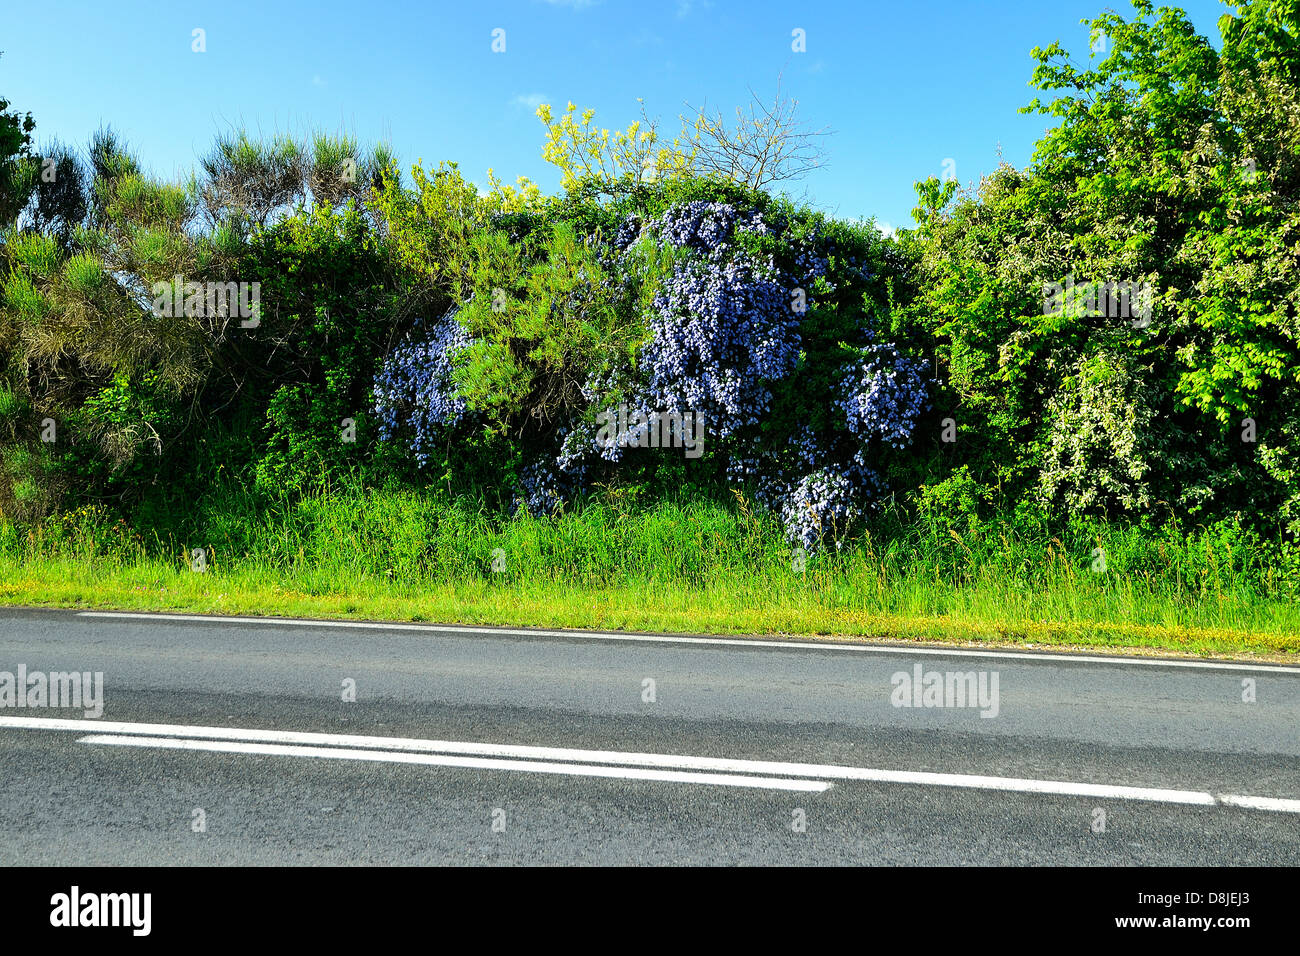 Road edged with a hurdle of shrubs with blue flowers (Morbihan gulf, Brittany, France). Stock Photo